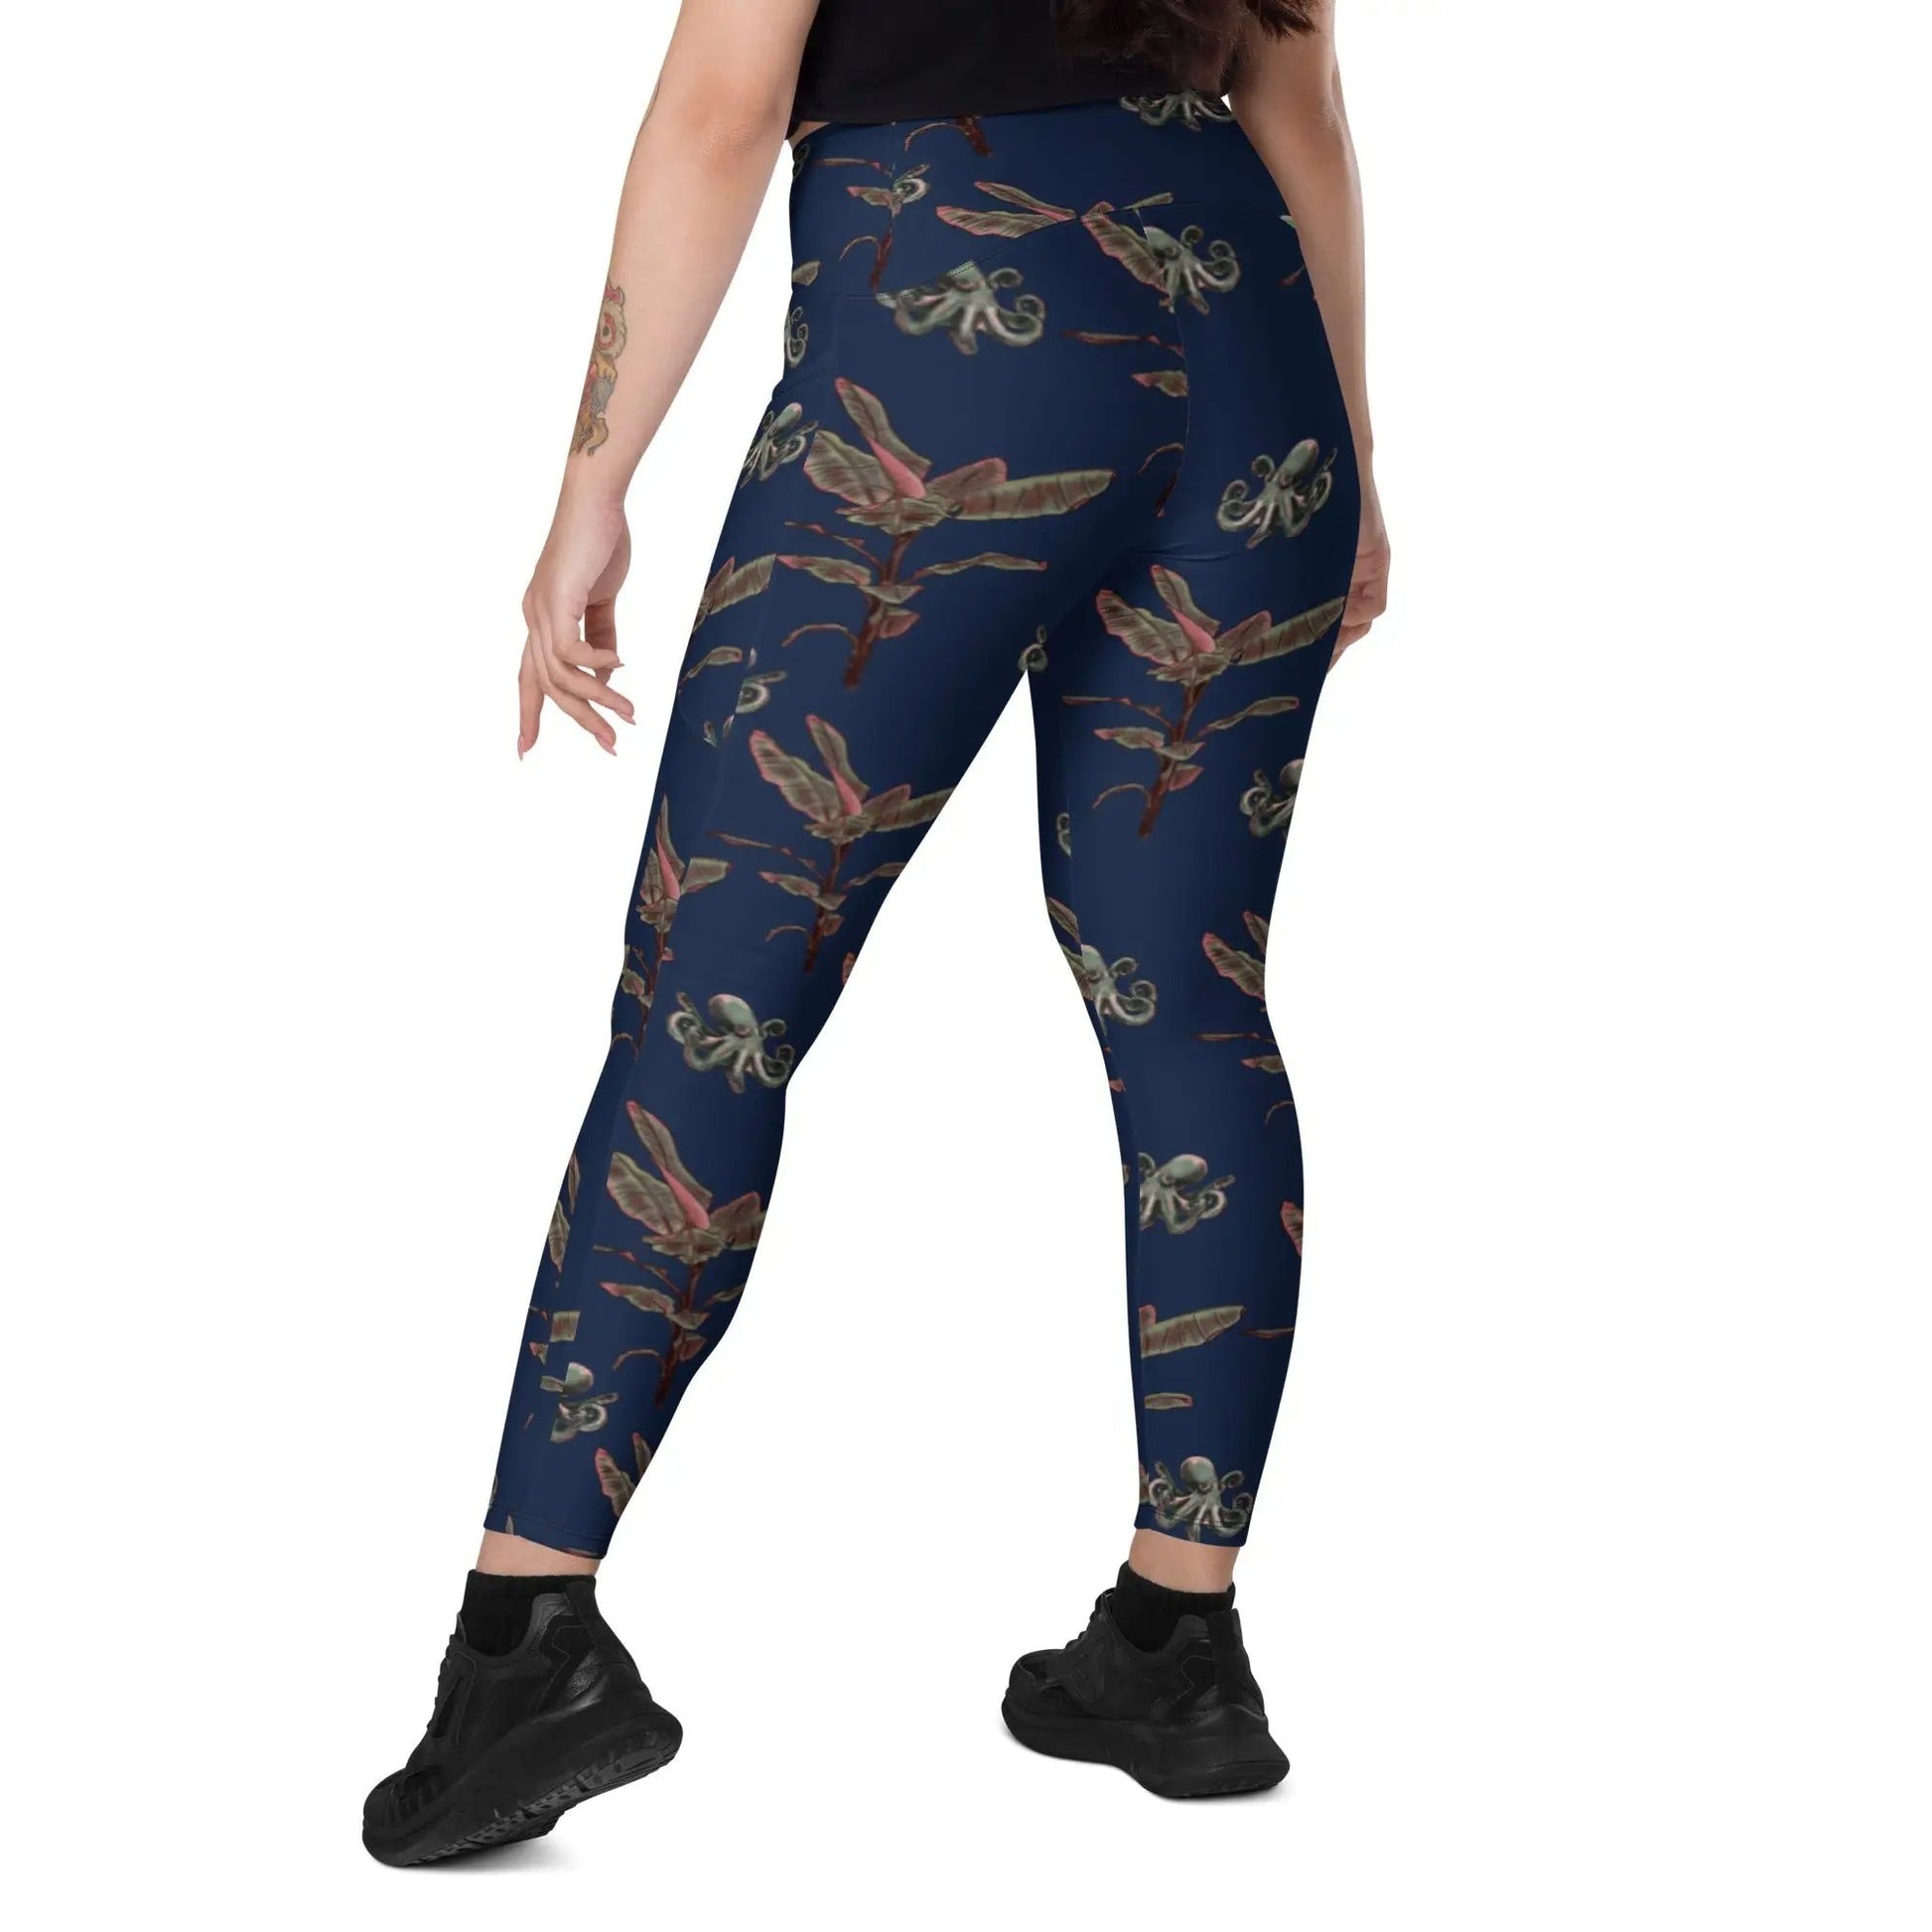 Vintage Octopus CROSSOVER leggings with pockets - Appalachian Bittersweet - Crossover Waist